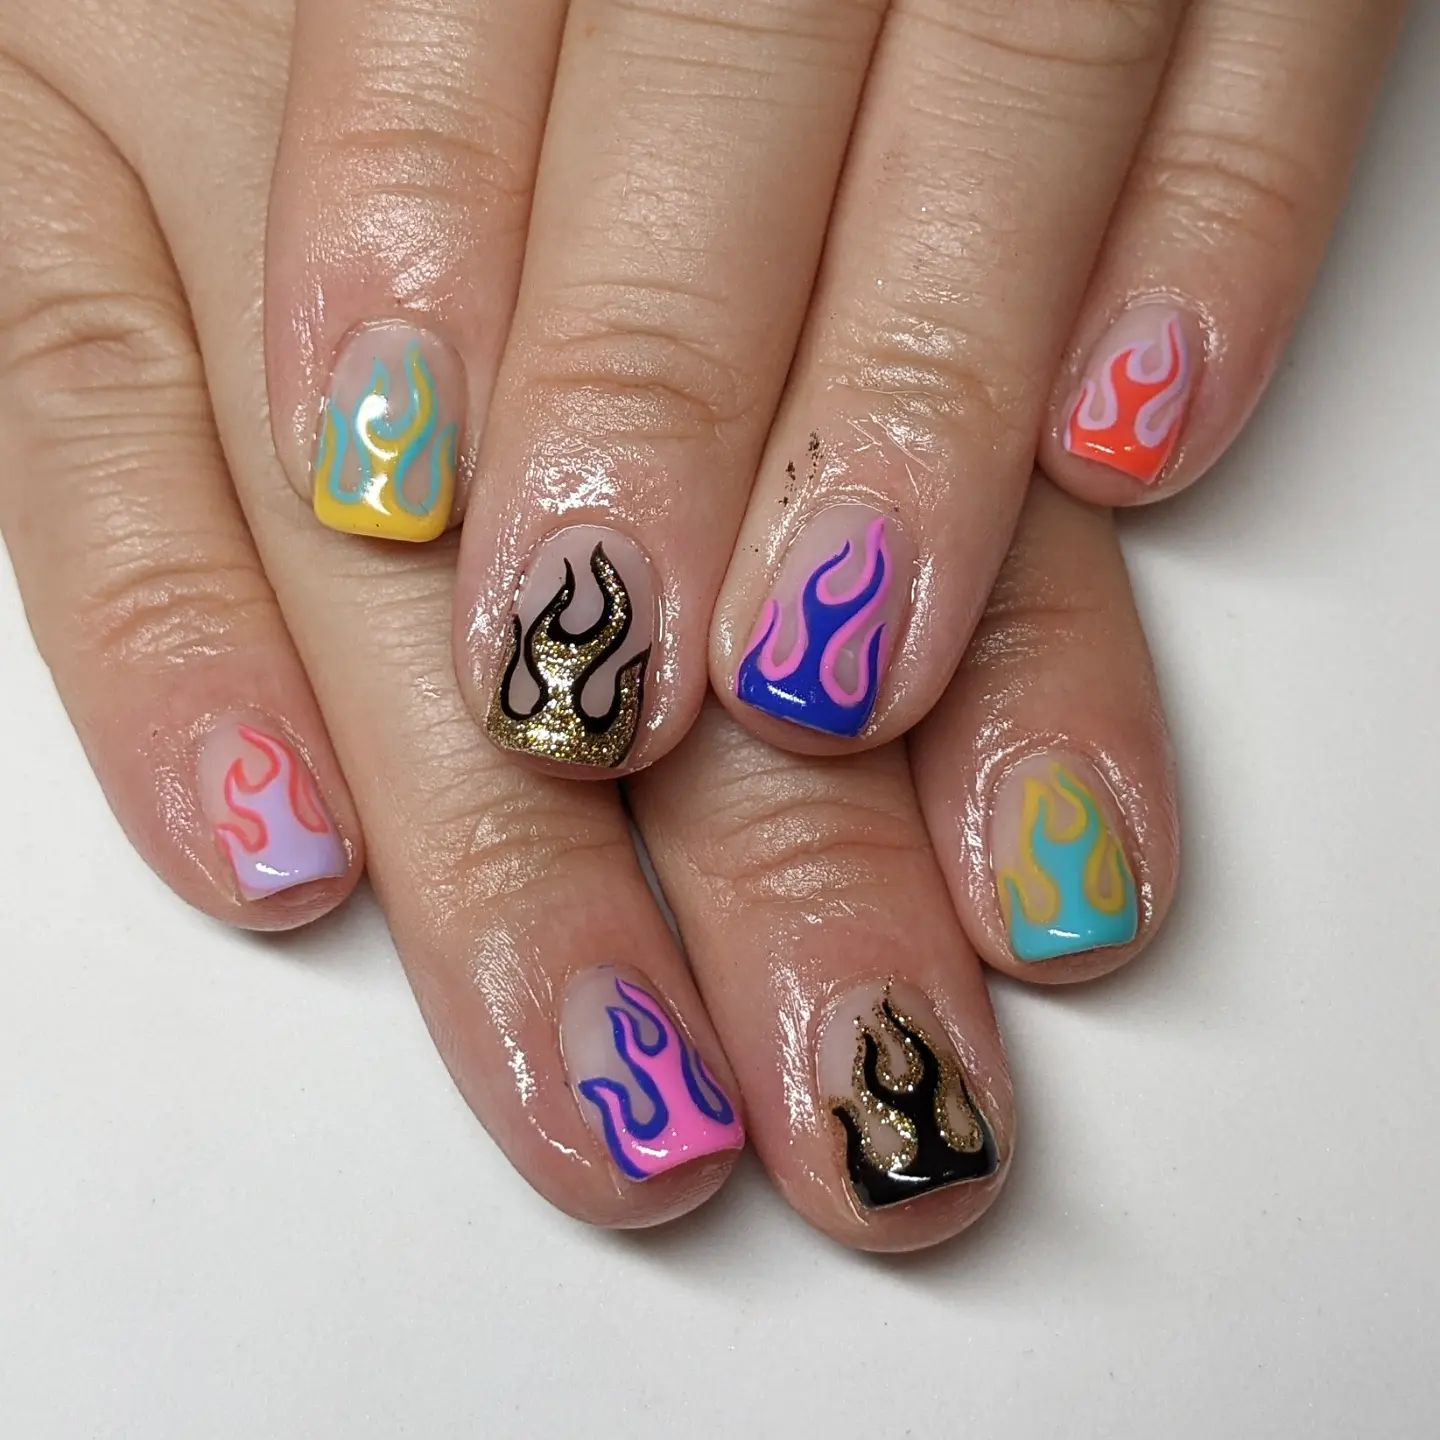  It is hard to choose which color to apply for your flame nails, so why don't you combine different colors together in one nail design? Adding different colored edges will make your flames stand out more.